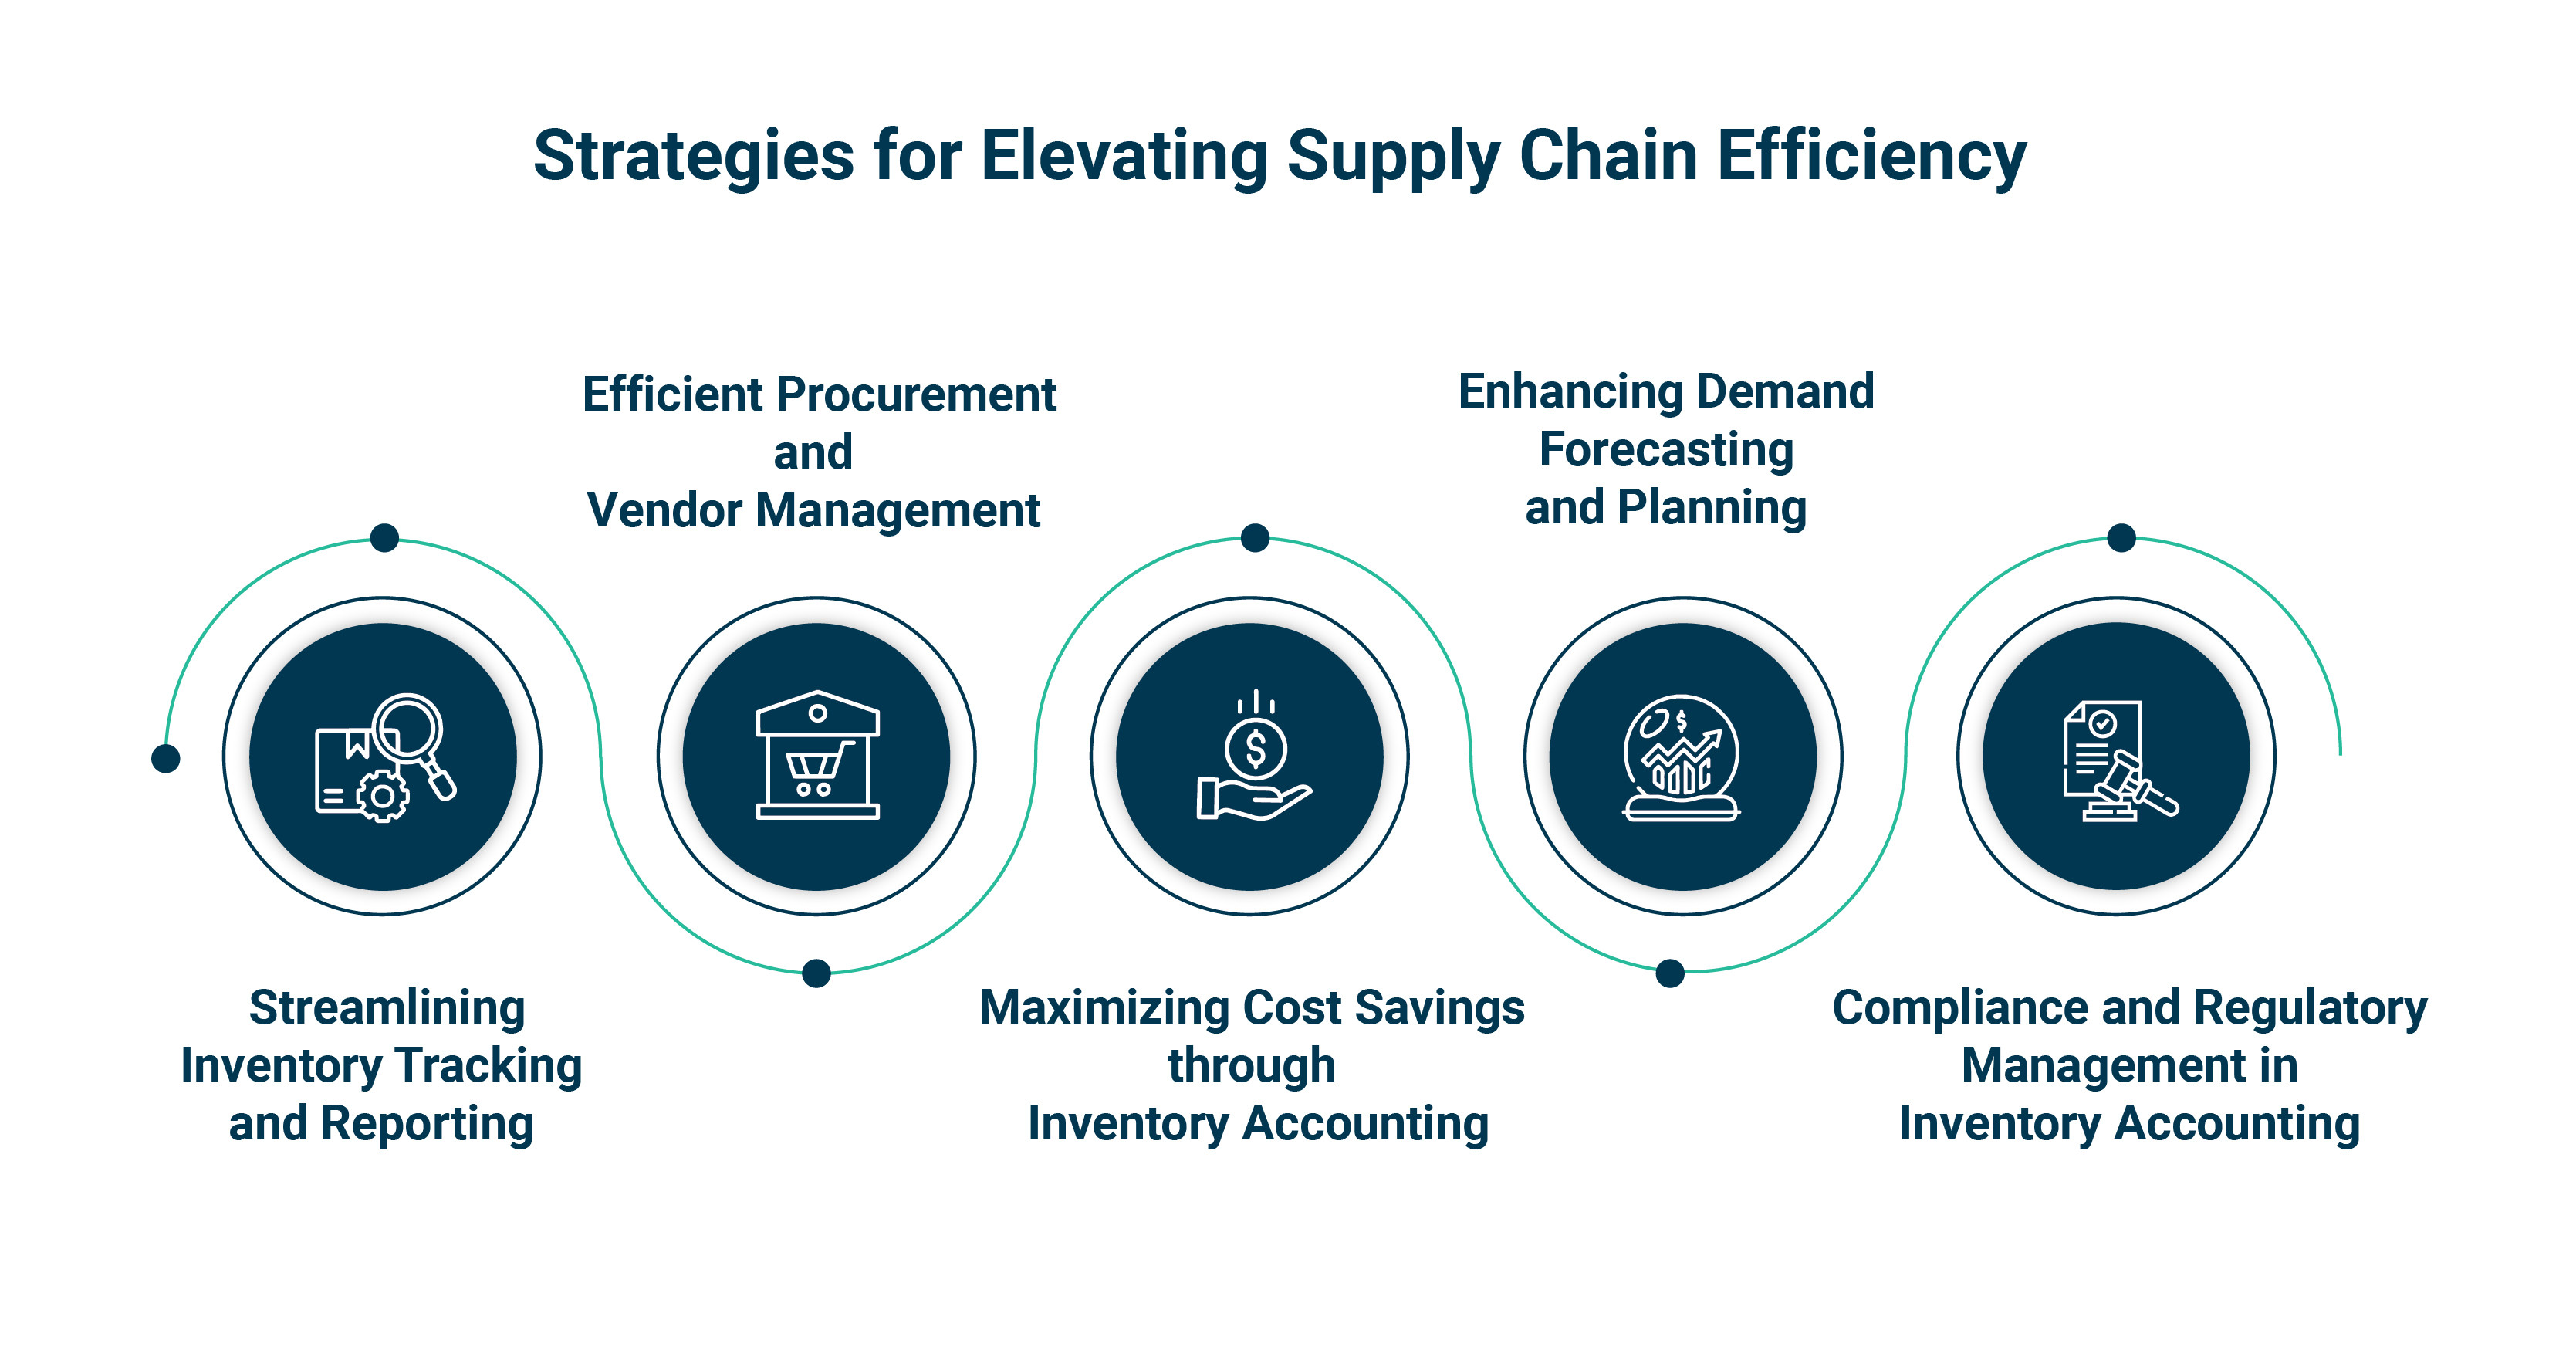  Strategies for Elevating Supply Chain Efficiency